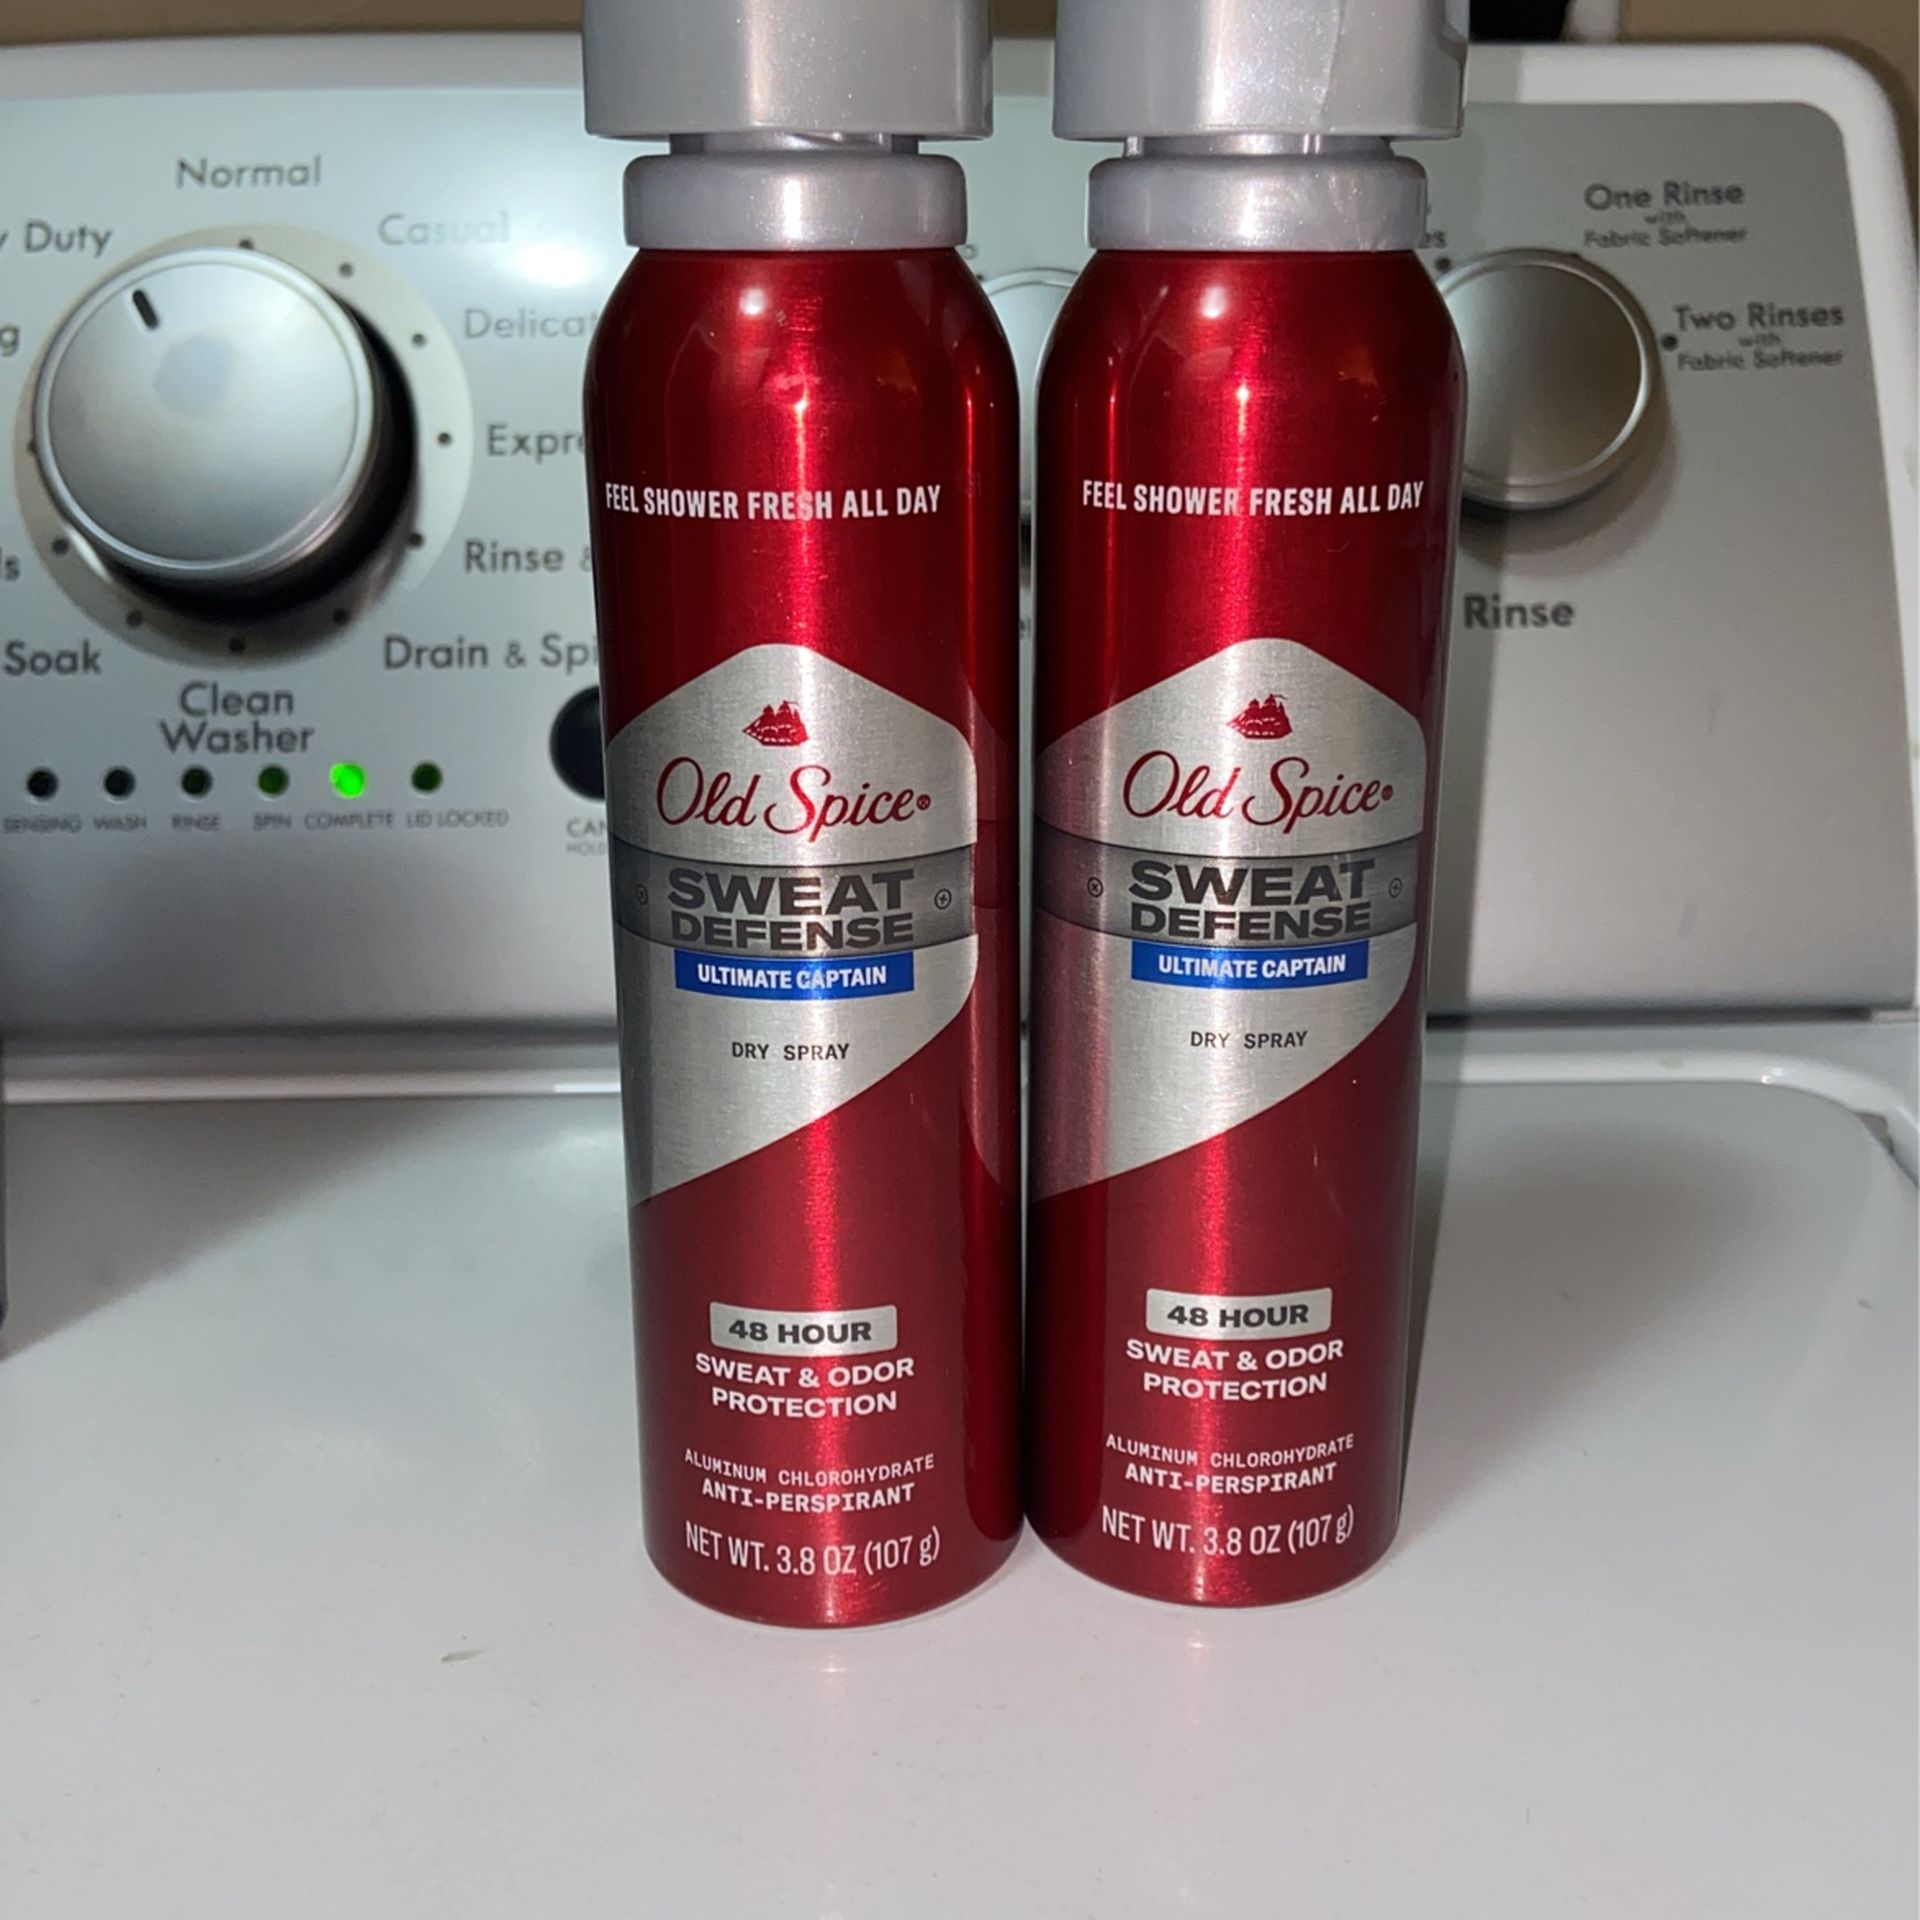 Old Spice Deodorant $4.00 Each